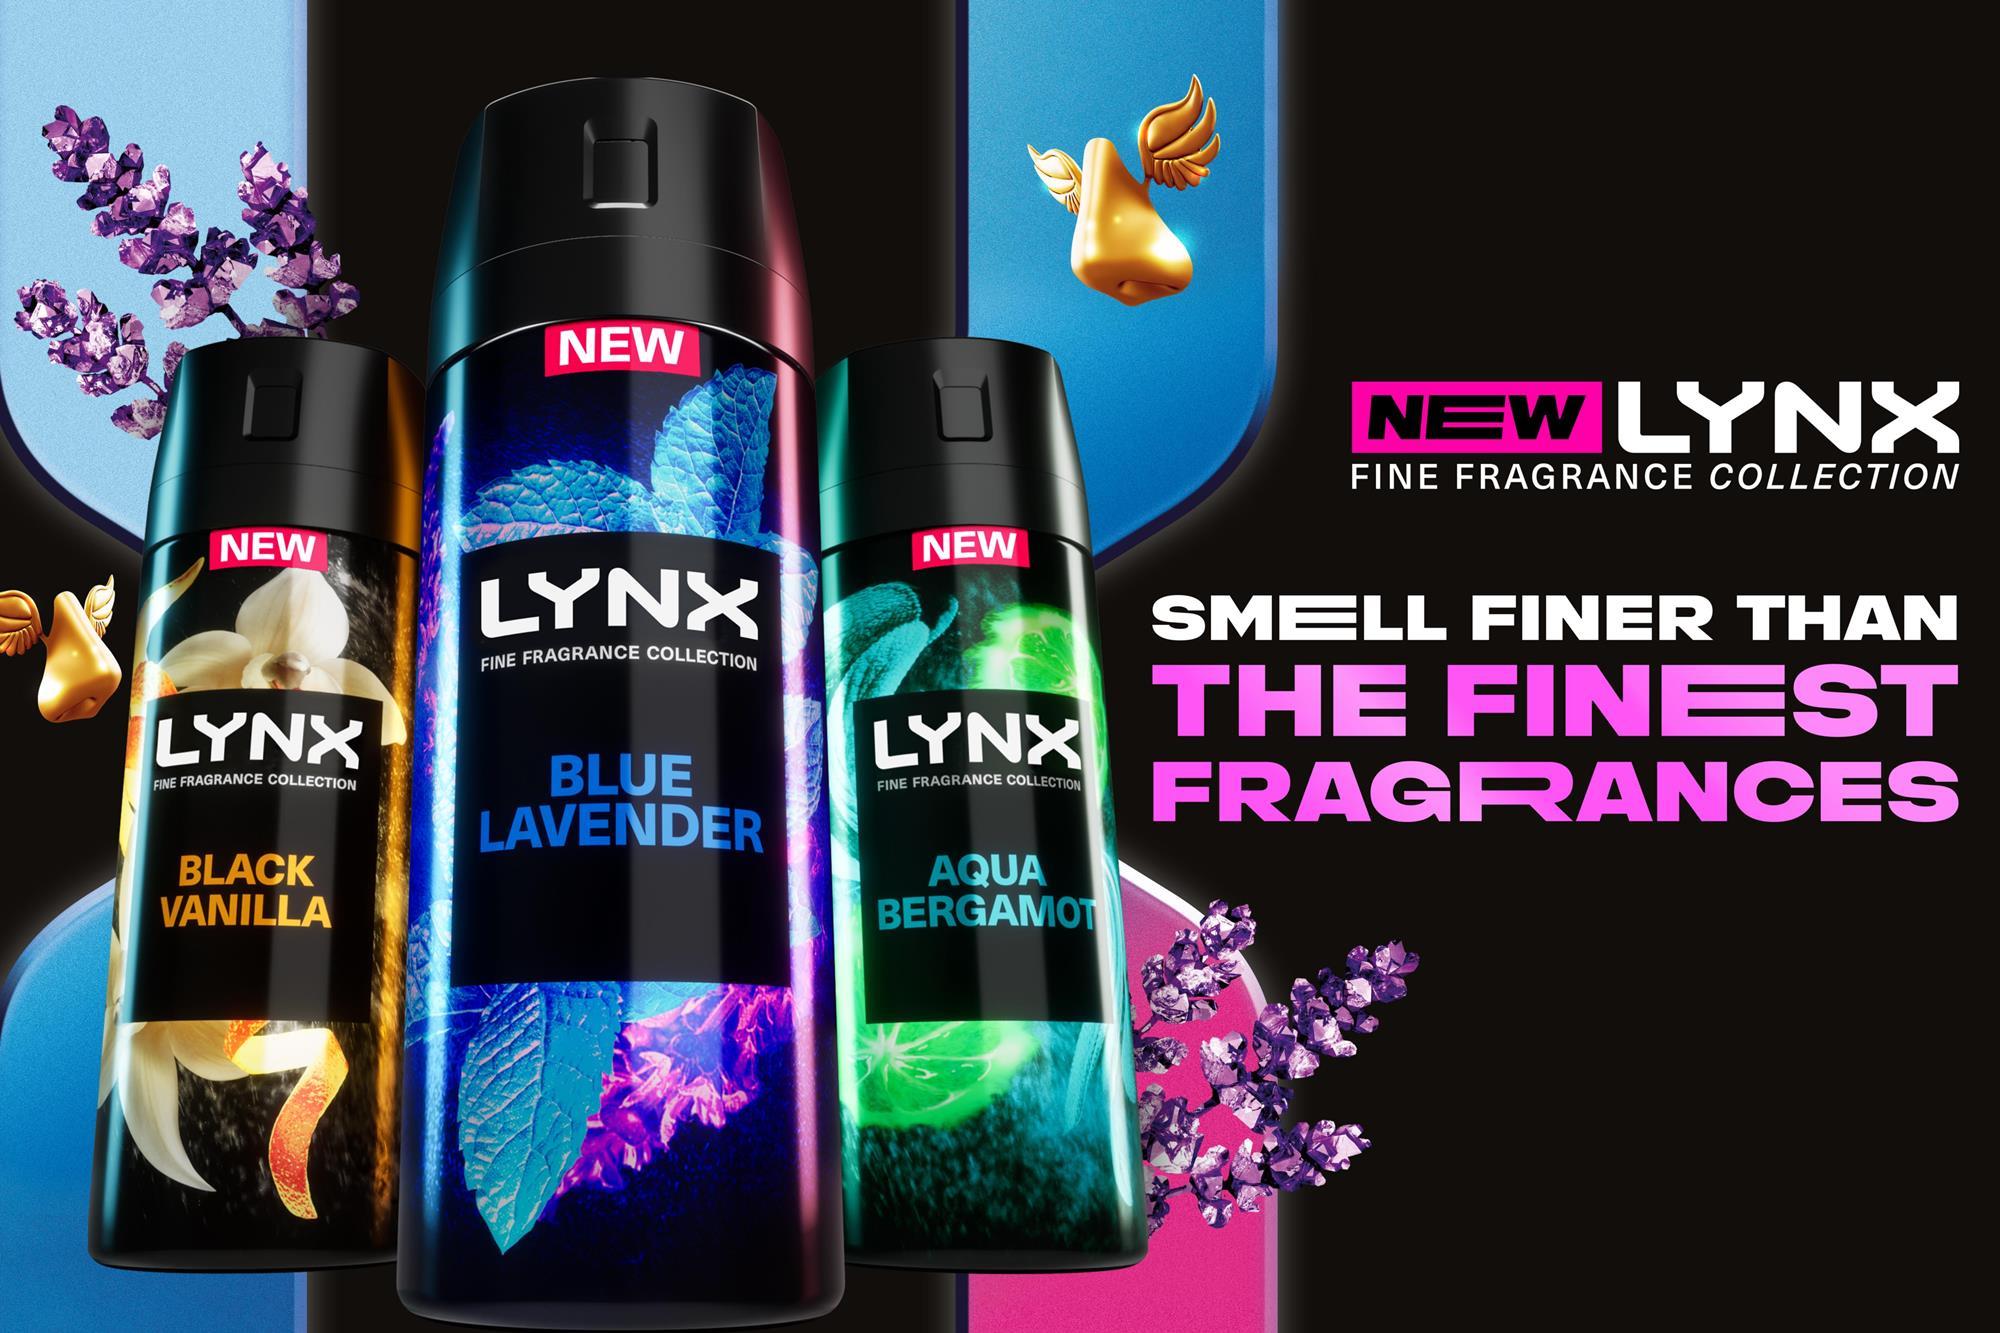 Lynx takes on posh colognes with five-strong Fine Fragrance Collection, News